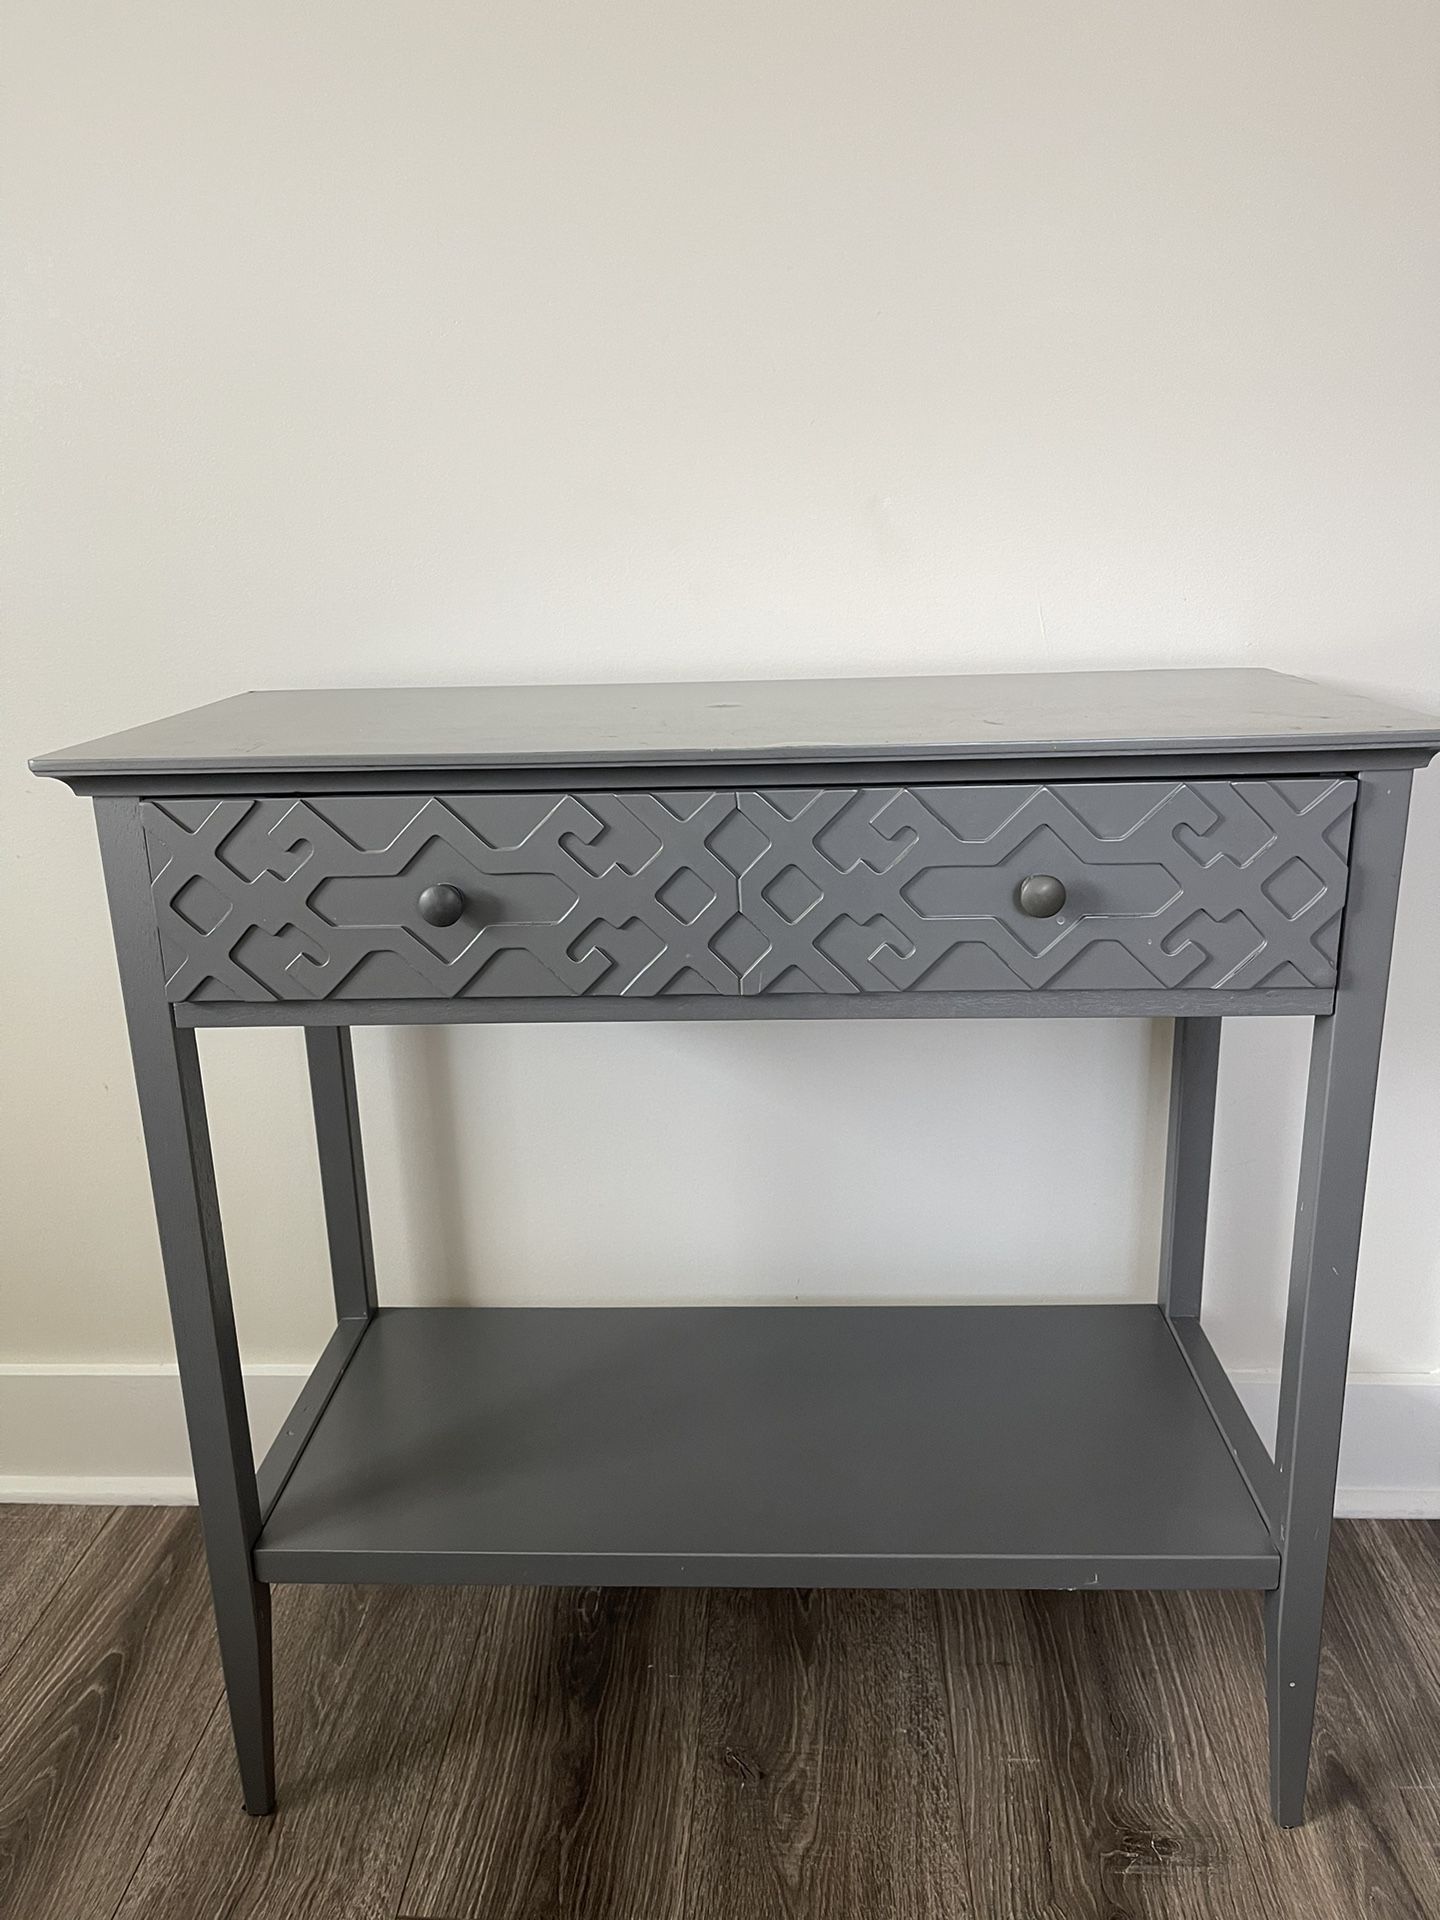 Target Threshold Fretwork Console Table Set Of 2 